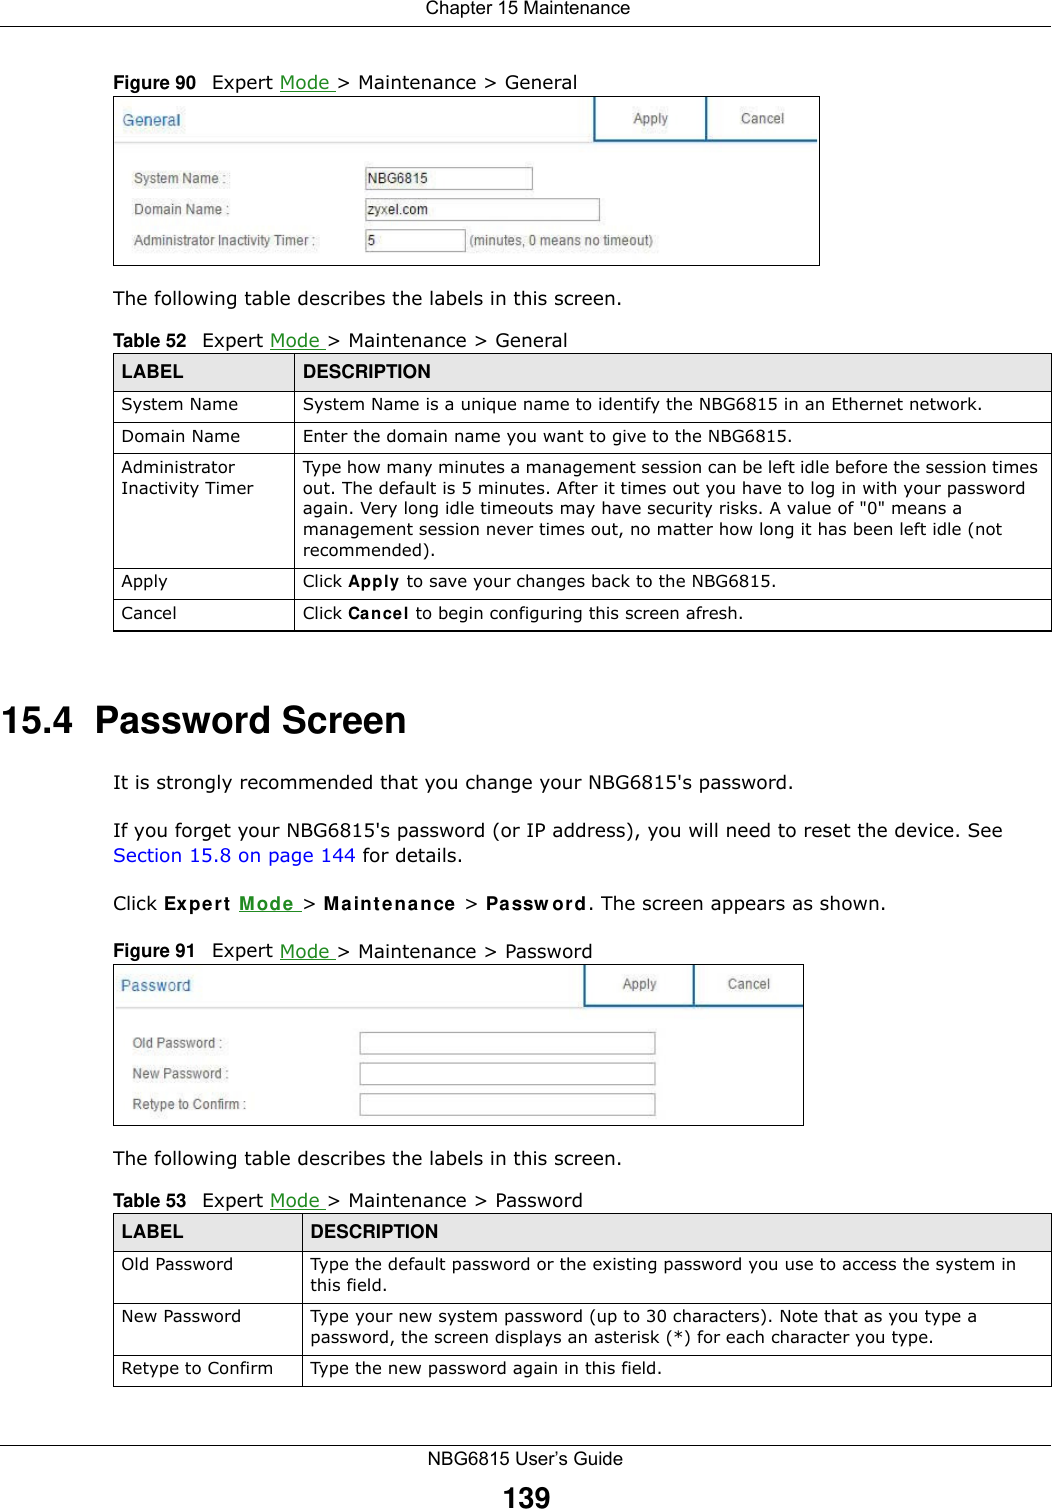  Chapter 15 MaintenanceNBG6815 User’s Guide139Figure 90   Expert Mode &gt; Maintenance &gt; General The following table describes the labels in this screen.15.4  Password ScreenIt is strongly recommended that you change your NBG6815&apos;s password. If you forget your NBG6815&apos;s password (or IP address), you will need to reset the device. See Section 15.8 on page 144 for details.Click Expert Mode &gt; Maintenance &gt; Password. The screen appears as shown.Figure 91   Expert Mode &gt; Maintenance &gt; Password The following table describes the labels in this screen.Table 52   Expert Mode &gt; Maintenance &gt; GeneralLABEL DESCRIPTIONSystem Name System Name is a unique name to identify the NBG6815 in an Ethernet network.Domain Name Enter the domain name you want to give to the NBG6815.Administrator Inactivity TimerType how many minutes a management session can be left idle before the session times out. The default is 5 minutes. After it times out you have to log in with your password again. Very long idle timeouts may have security risks. A value of &quot;0&quot; means a management session never times out, no matter how long it has been left idle (not recommended).Apply Click Apply to save your changes back to the NBG6815.Cancel Click Cancel to begin configuring this screen afresh.Table 53   Expert Mode &gt; Maintenance &gt; PasswordLABEL DESCRIPTIONOld Password Type the default password or the existing password you use to access the system in this field.New Password Type your new system password (up to 30 characters). Note that as you type a password, the screen displays an asterisk (*) for each character you type.Retype to Confirm Type the new password again in this field.